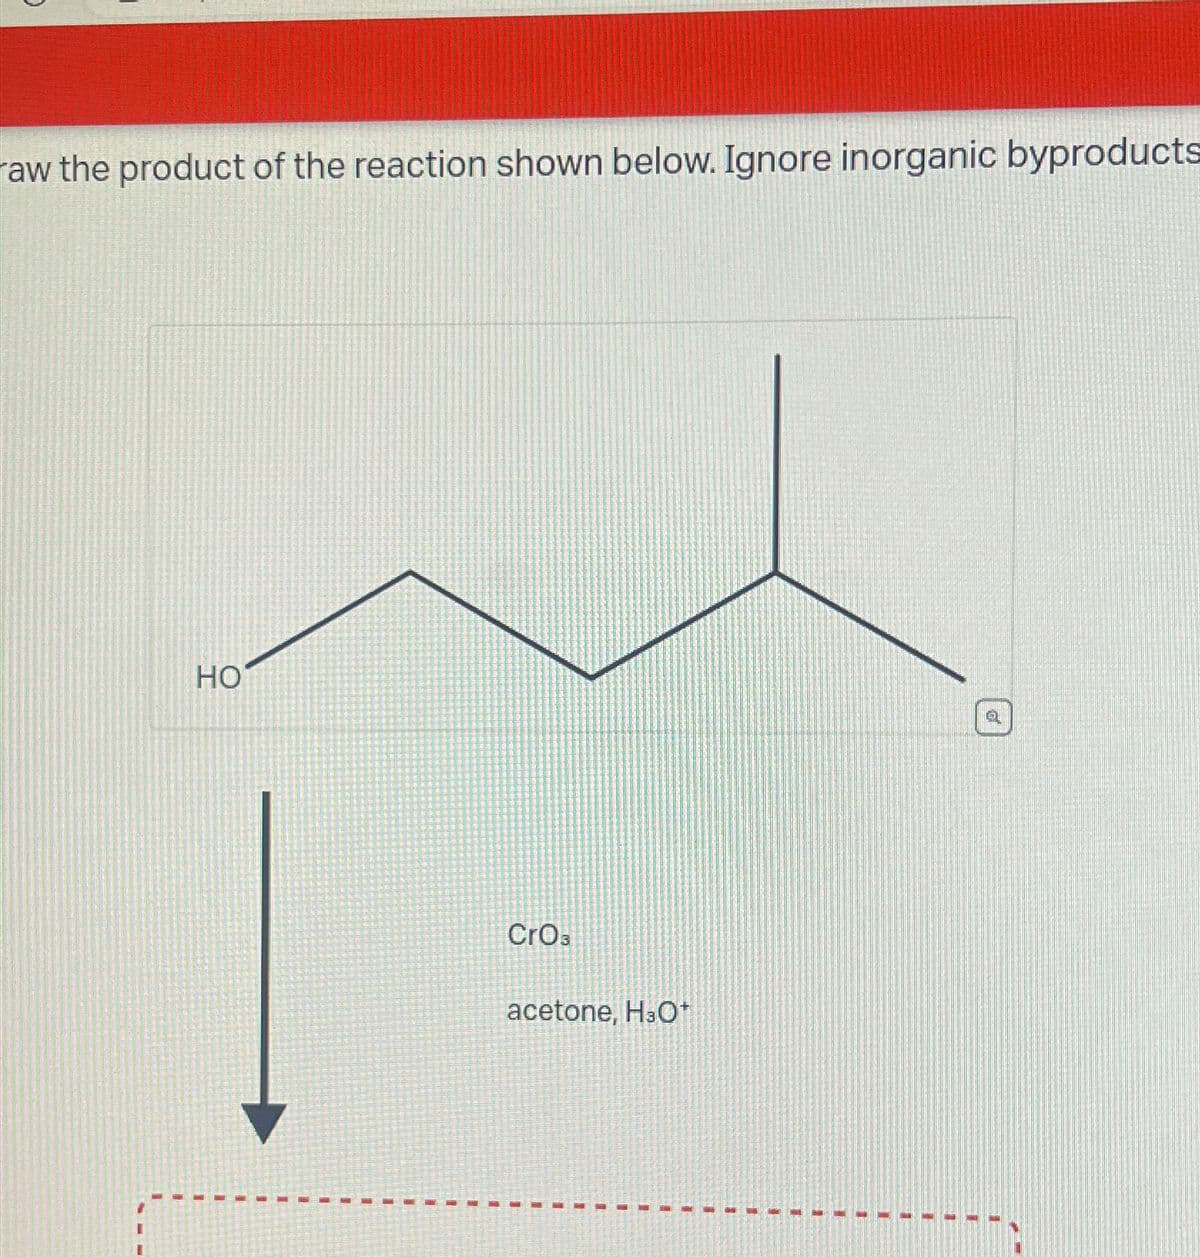 aw the product of the reaction shown below. Ignore inorganic byproducts
HO
1
1
7
CrO3
acetone, H30t
17
1
T
11